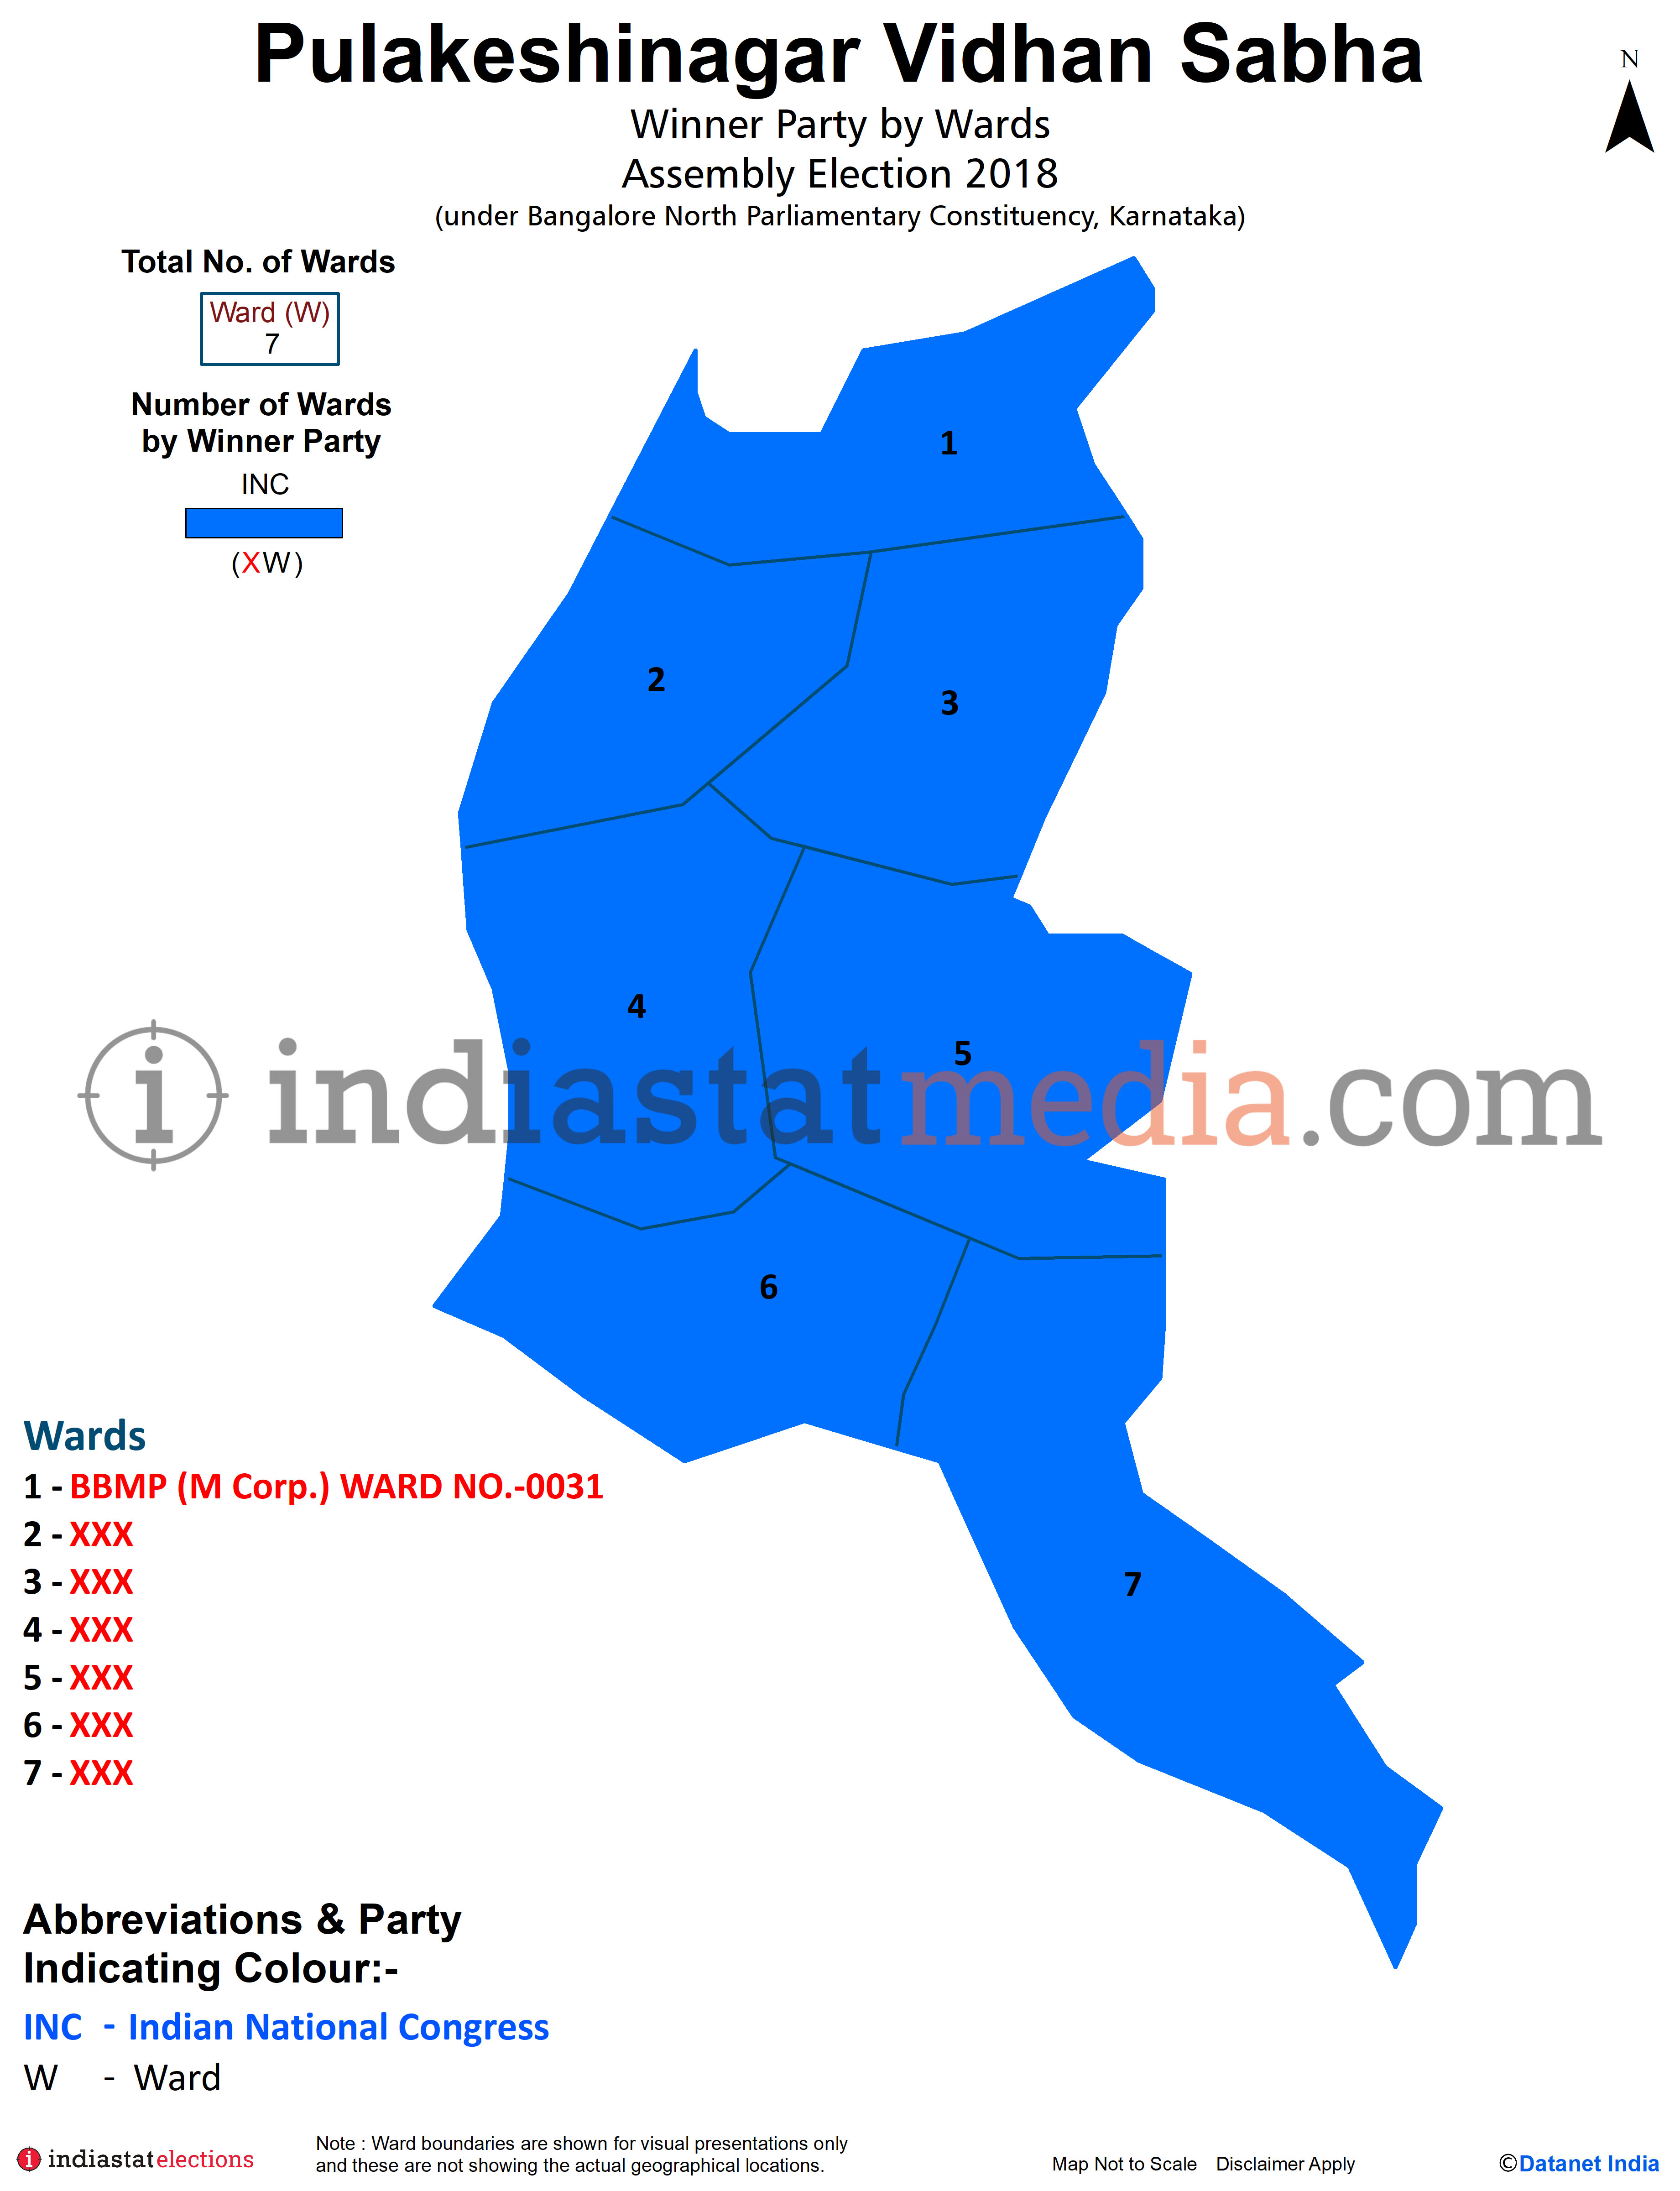 Winner Parties by Wards in Pulakeshinagar Assembly Constituency under Bangalore North Parliamentary Constituency in Karnataka (Assembly Election - 2018)